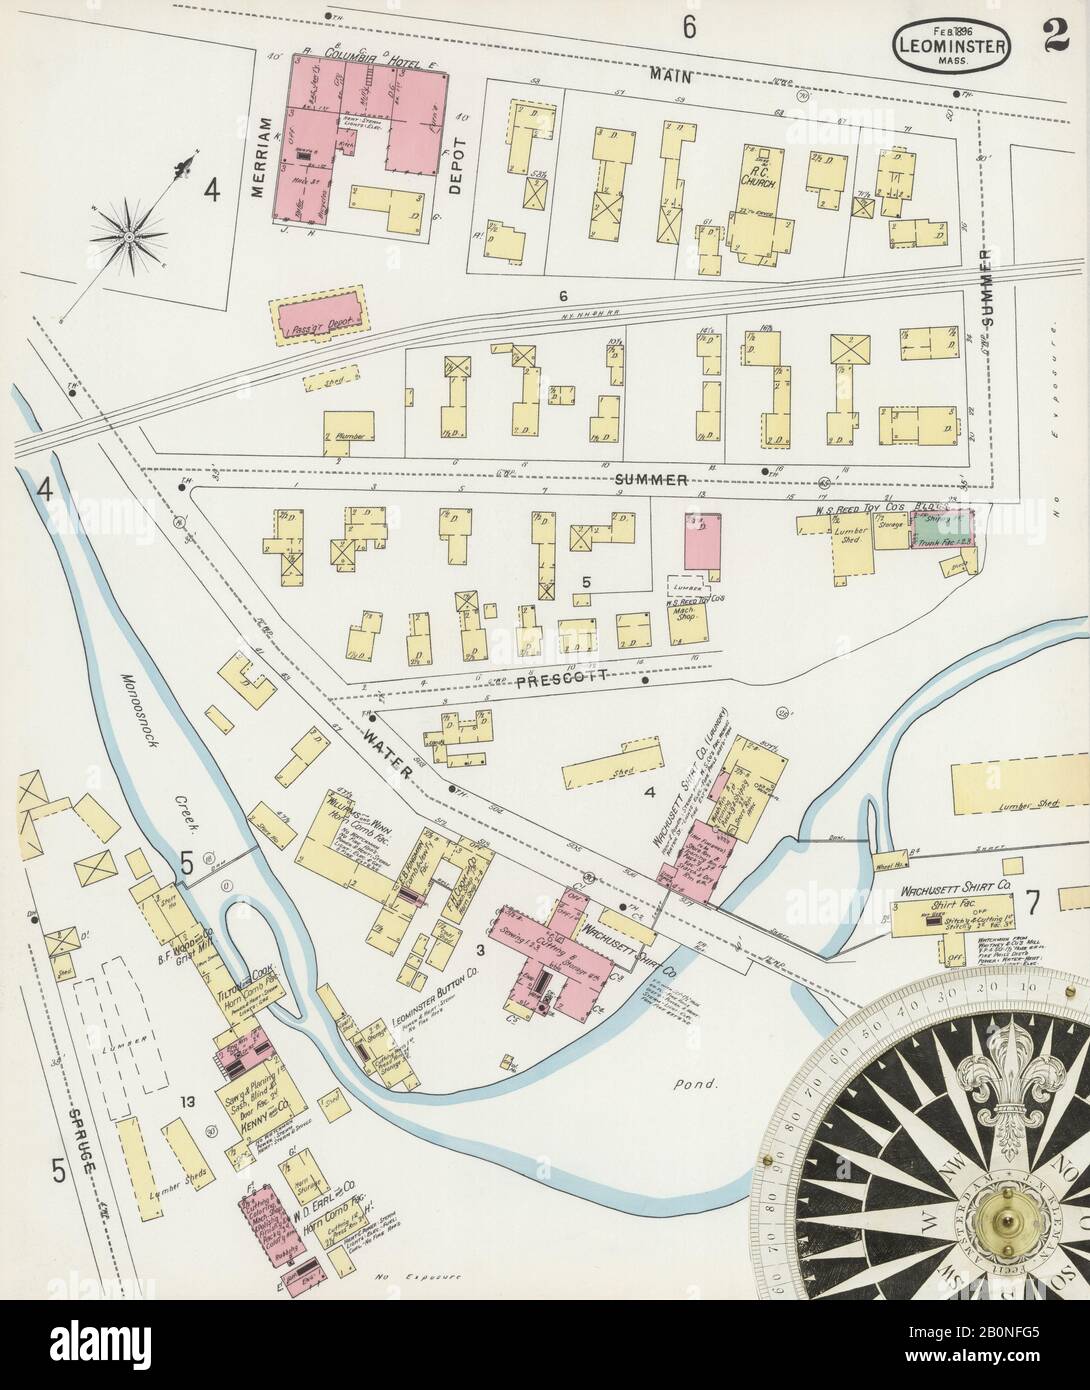 Image 2 of Sanborn Fire Insurance Map from Leominster, Worcester County, Massachusetts. Feb 1896. 11 Sheet(s), America, street map with a Nineteenth Century compass Stock Photo